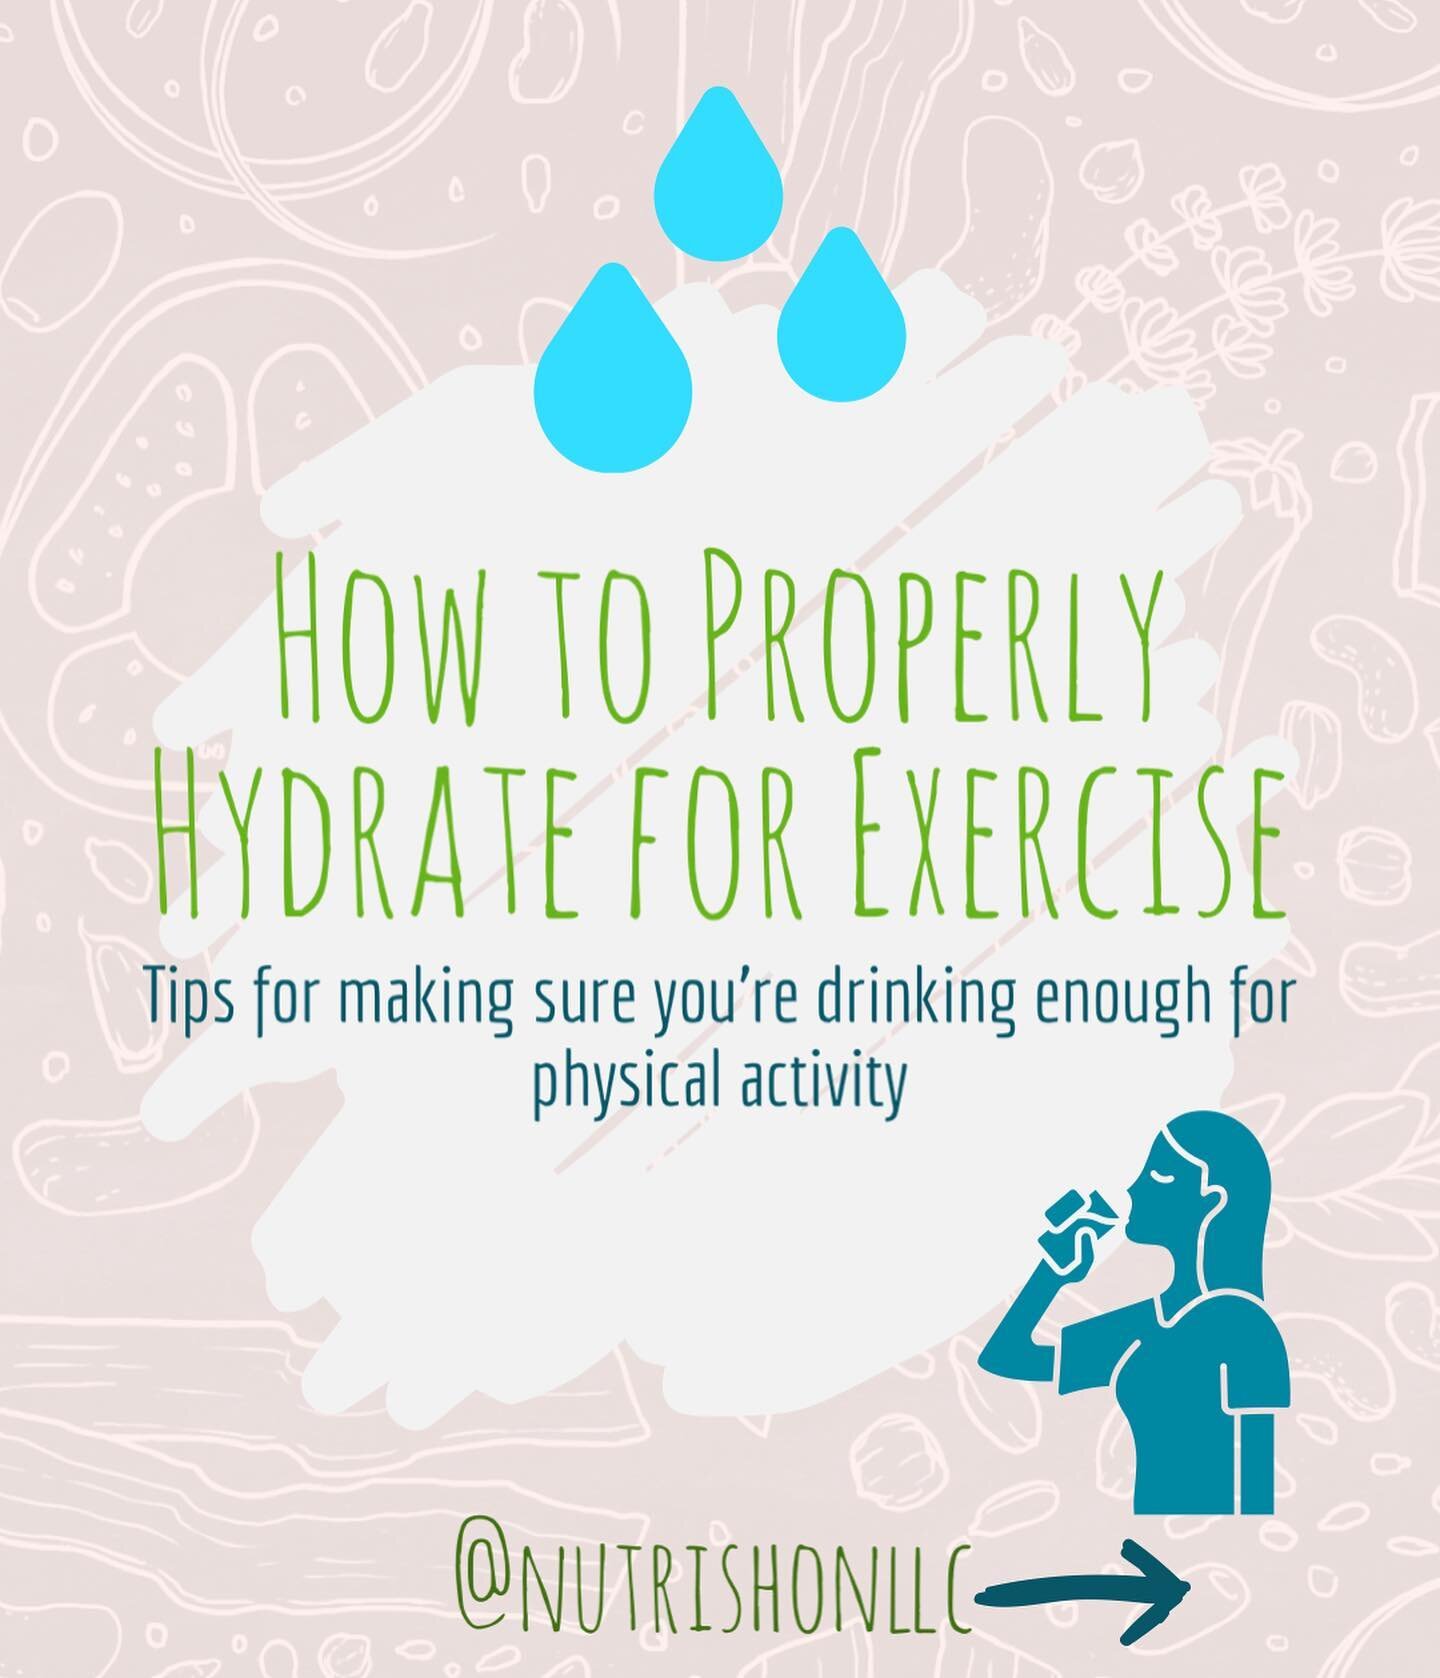 💧Hydration is one of the easiest ways to feel your best. 

When you&rsquo;re physically active, our hydration demands increase. A 2% loss of hydration can cause fatigue, cramping, dizziness, headaches, loss of cognition, nausea, and more!

Fifteen m